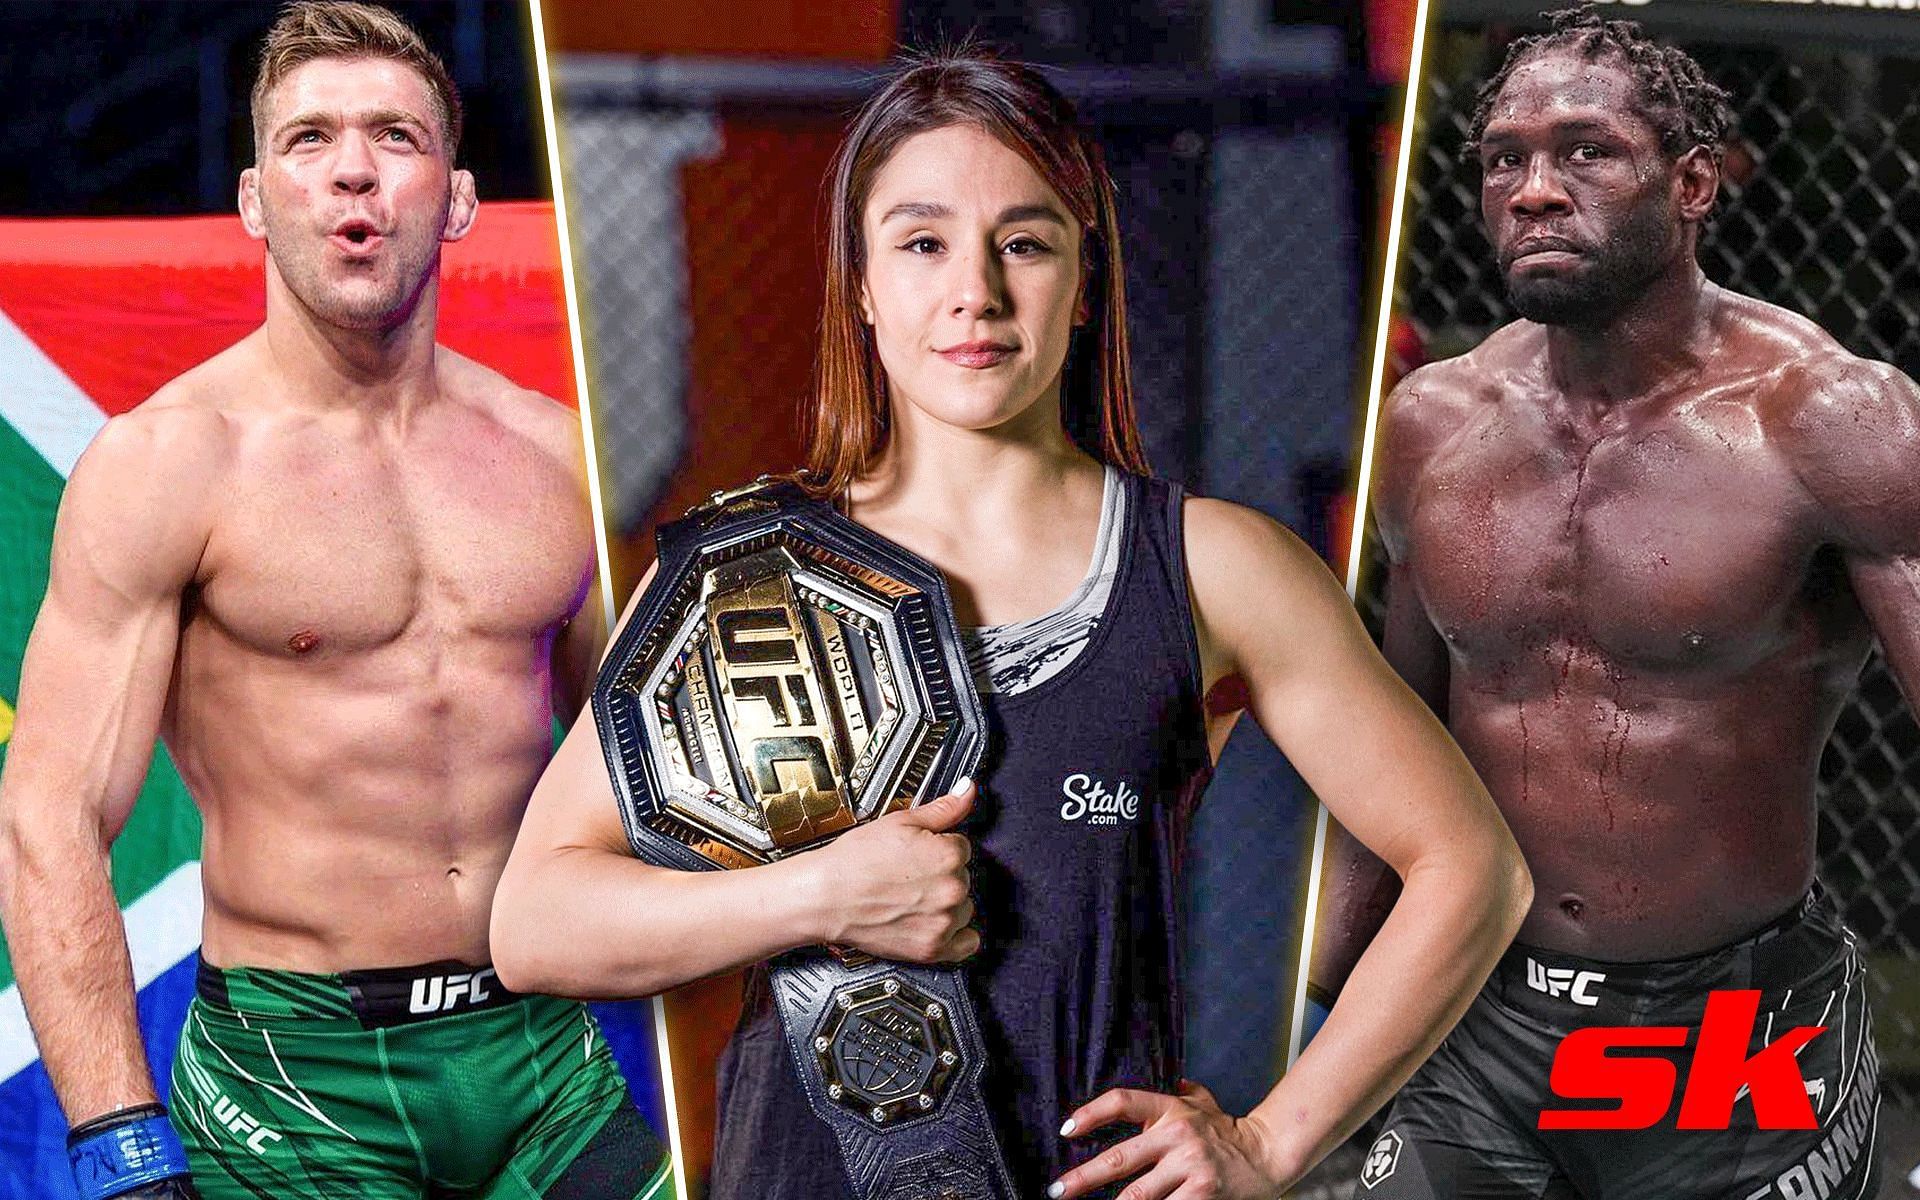 From the left- Dricus Du Plessis, Alexa Grasso and Jared Cannonier [Image credits: @ufc, @dricusduplessis and @alexa_grasso on Instagram]